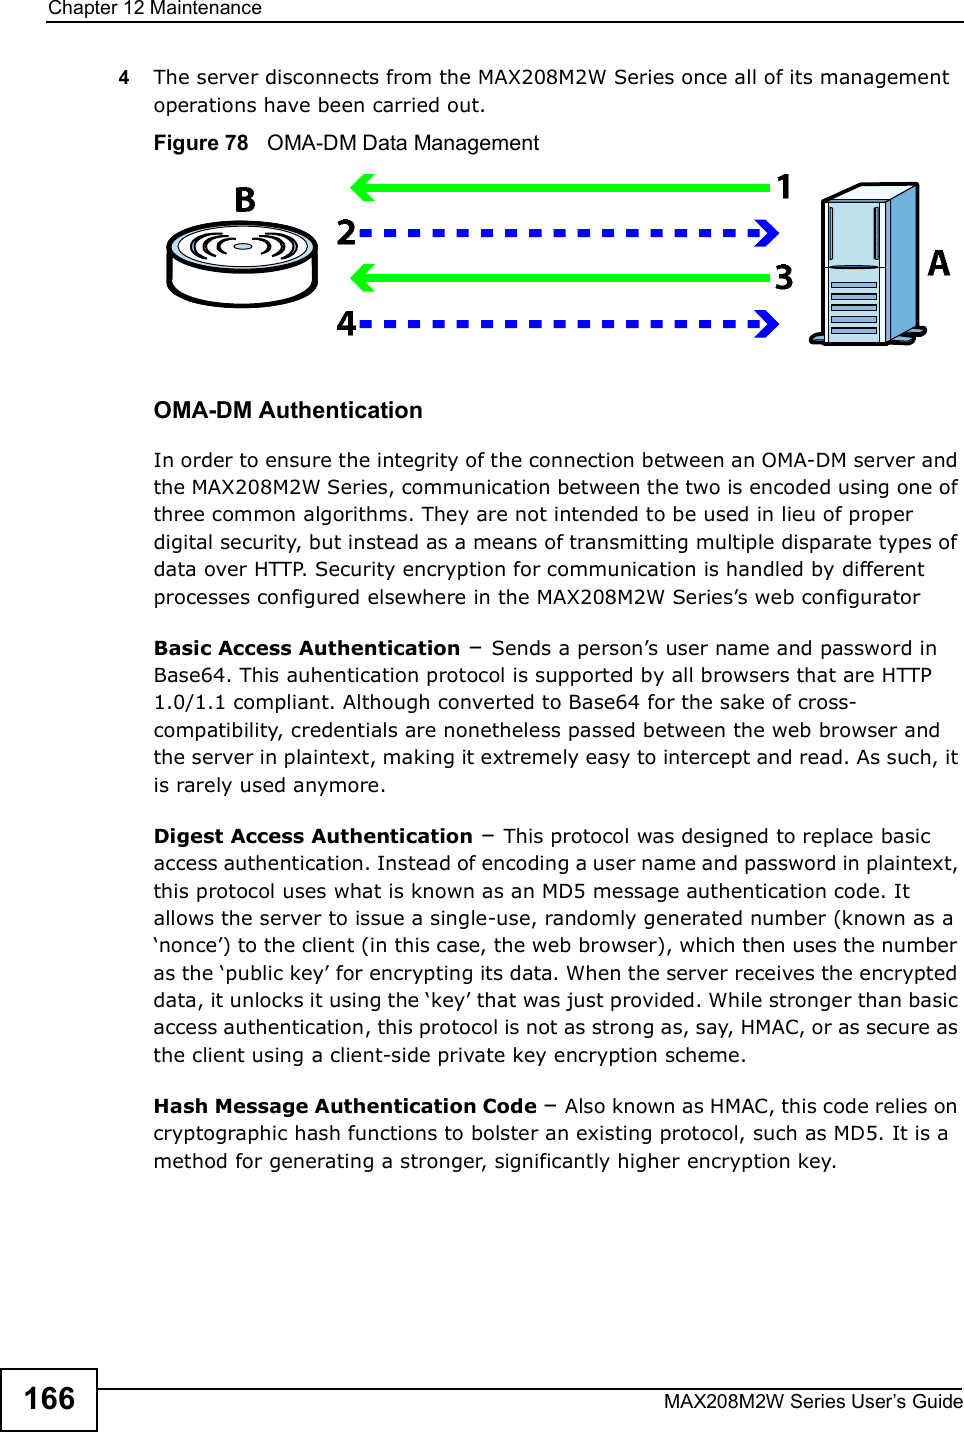 Chapter 12MaintenanceMAX208M2W Series User s Guide1664The server disconnects from the MAX208M2W Series once all of its management operations have been carried out.Figure 78   OMA-DM Data ManagementOMA-DM AuthenticationIn order to ensure the integrity of the connection between an OMA-DM server and the MAX208M2W Series, communication between the two is encoded using one of three common algorithms. They are not intended to be used in lieu of proper digital security, but instead as a means of transmitting multiple disparate types of data over HTTP. Security encryption for communication is handled by different processes configured elsewhere in the MAX208M2W Series s web configuratorBasic Access Authentication % Sends a person s user name and password in Base64. This auhentication protocol is supported by all browsers that are HTTP 1.0/1.1 compliant. Although converted to Base64 for the sake of cross-compatibility, credentials are nonetheless passed between the web browser and the server in plaintext, making it extremely easy to intercept and read. As such, it is rarely used anymore.Digest Access Authentication % This protocol was designed to replace basic access authentication. Instead of encoding a user name and password in plaintext, this protocol uses what is known as an MD5 message authentication code. It allows the server to issue a single-use, randomly generated number (known as a $nonce ) to the client (in this case, the web browser), which then uses the number as the $public key  for encrypting its data. When the server receives the encrypted data, it unlocks it using the $key  that was just provided. While stronger than basic access authentication, this protocol is not as strong as, say, HMAC, or as secure as the client using a client-side private key encryption scheme. Hash Message Authentication Code % Also known as HMAC, this code relies on cryptographic hash functions to bolster an existing protocol, such as MD5. It is a method for generating a stronger, significantly higher encryption key.